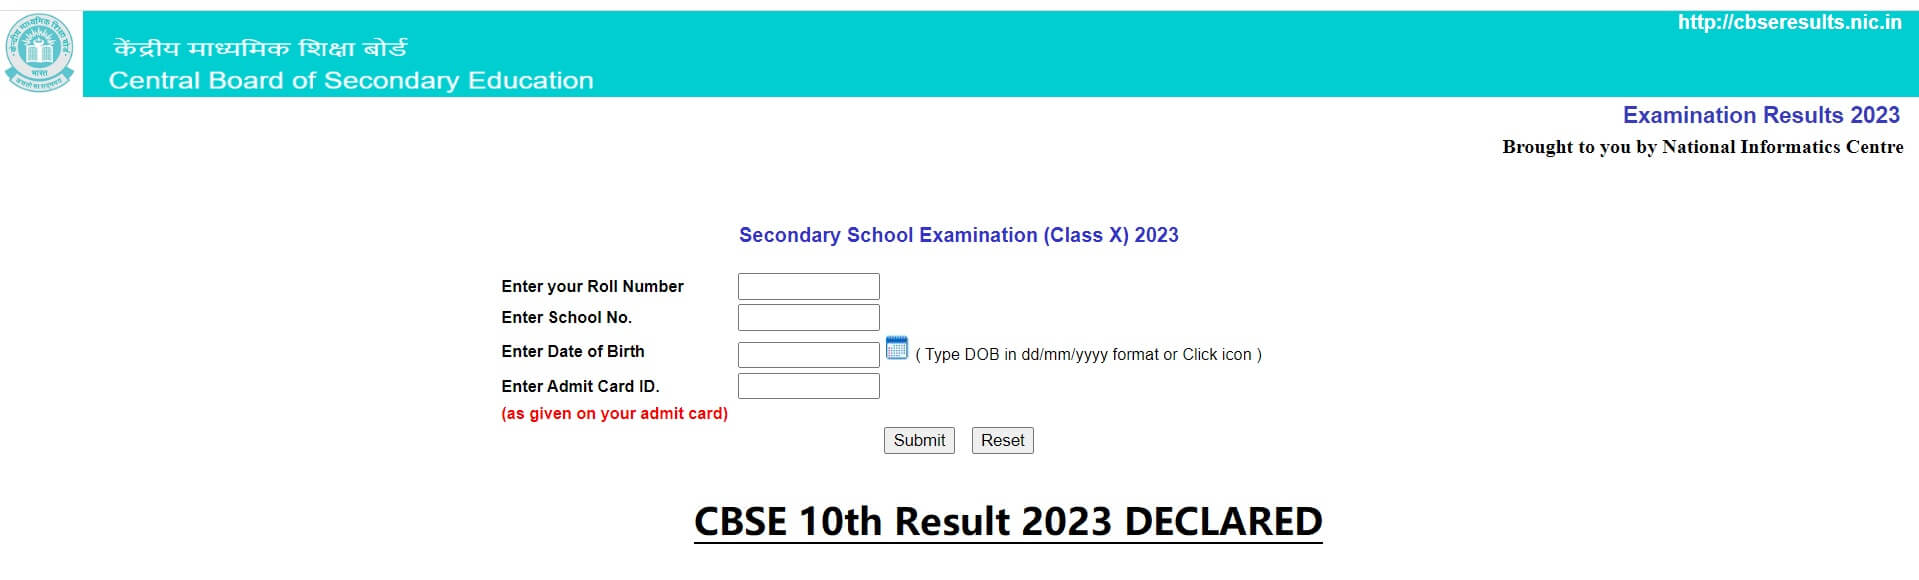 Get here latest updates and news for CBSE Class 10th Result 2023